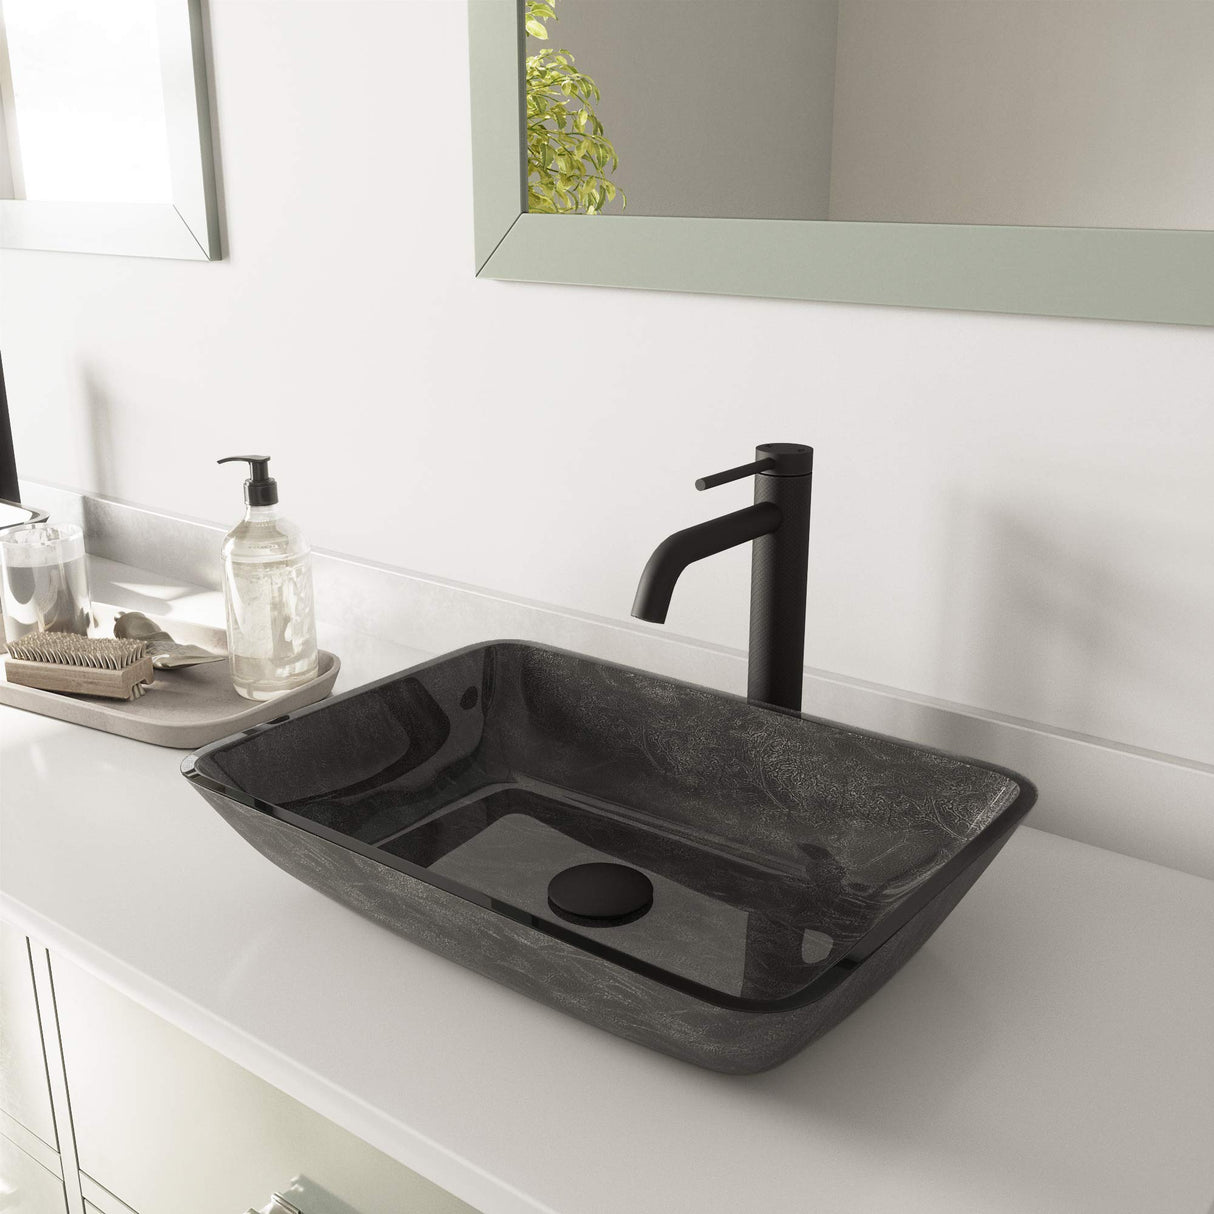 VIGO VGT1416 18.13" L -13.0" W -10.25" H Glass Rectangular Vessel Bathroom Sink in Onyx Gray with Lexington Faucet and Pop-Up Drain in Matte Black